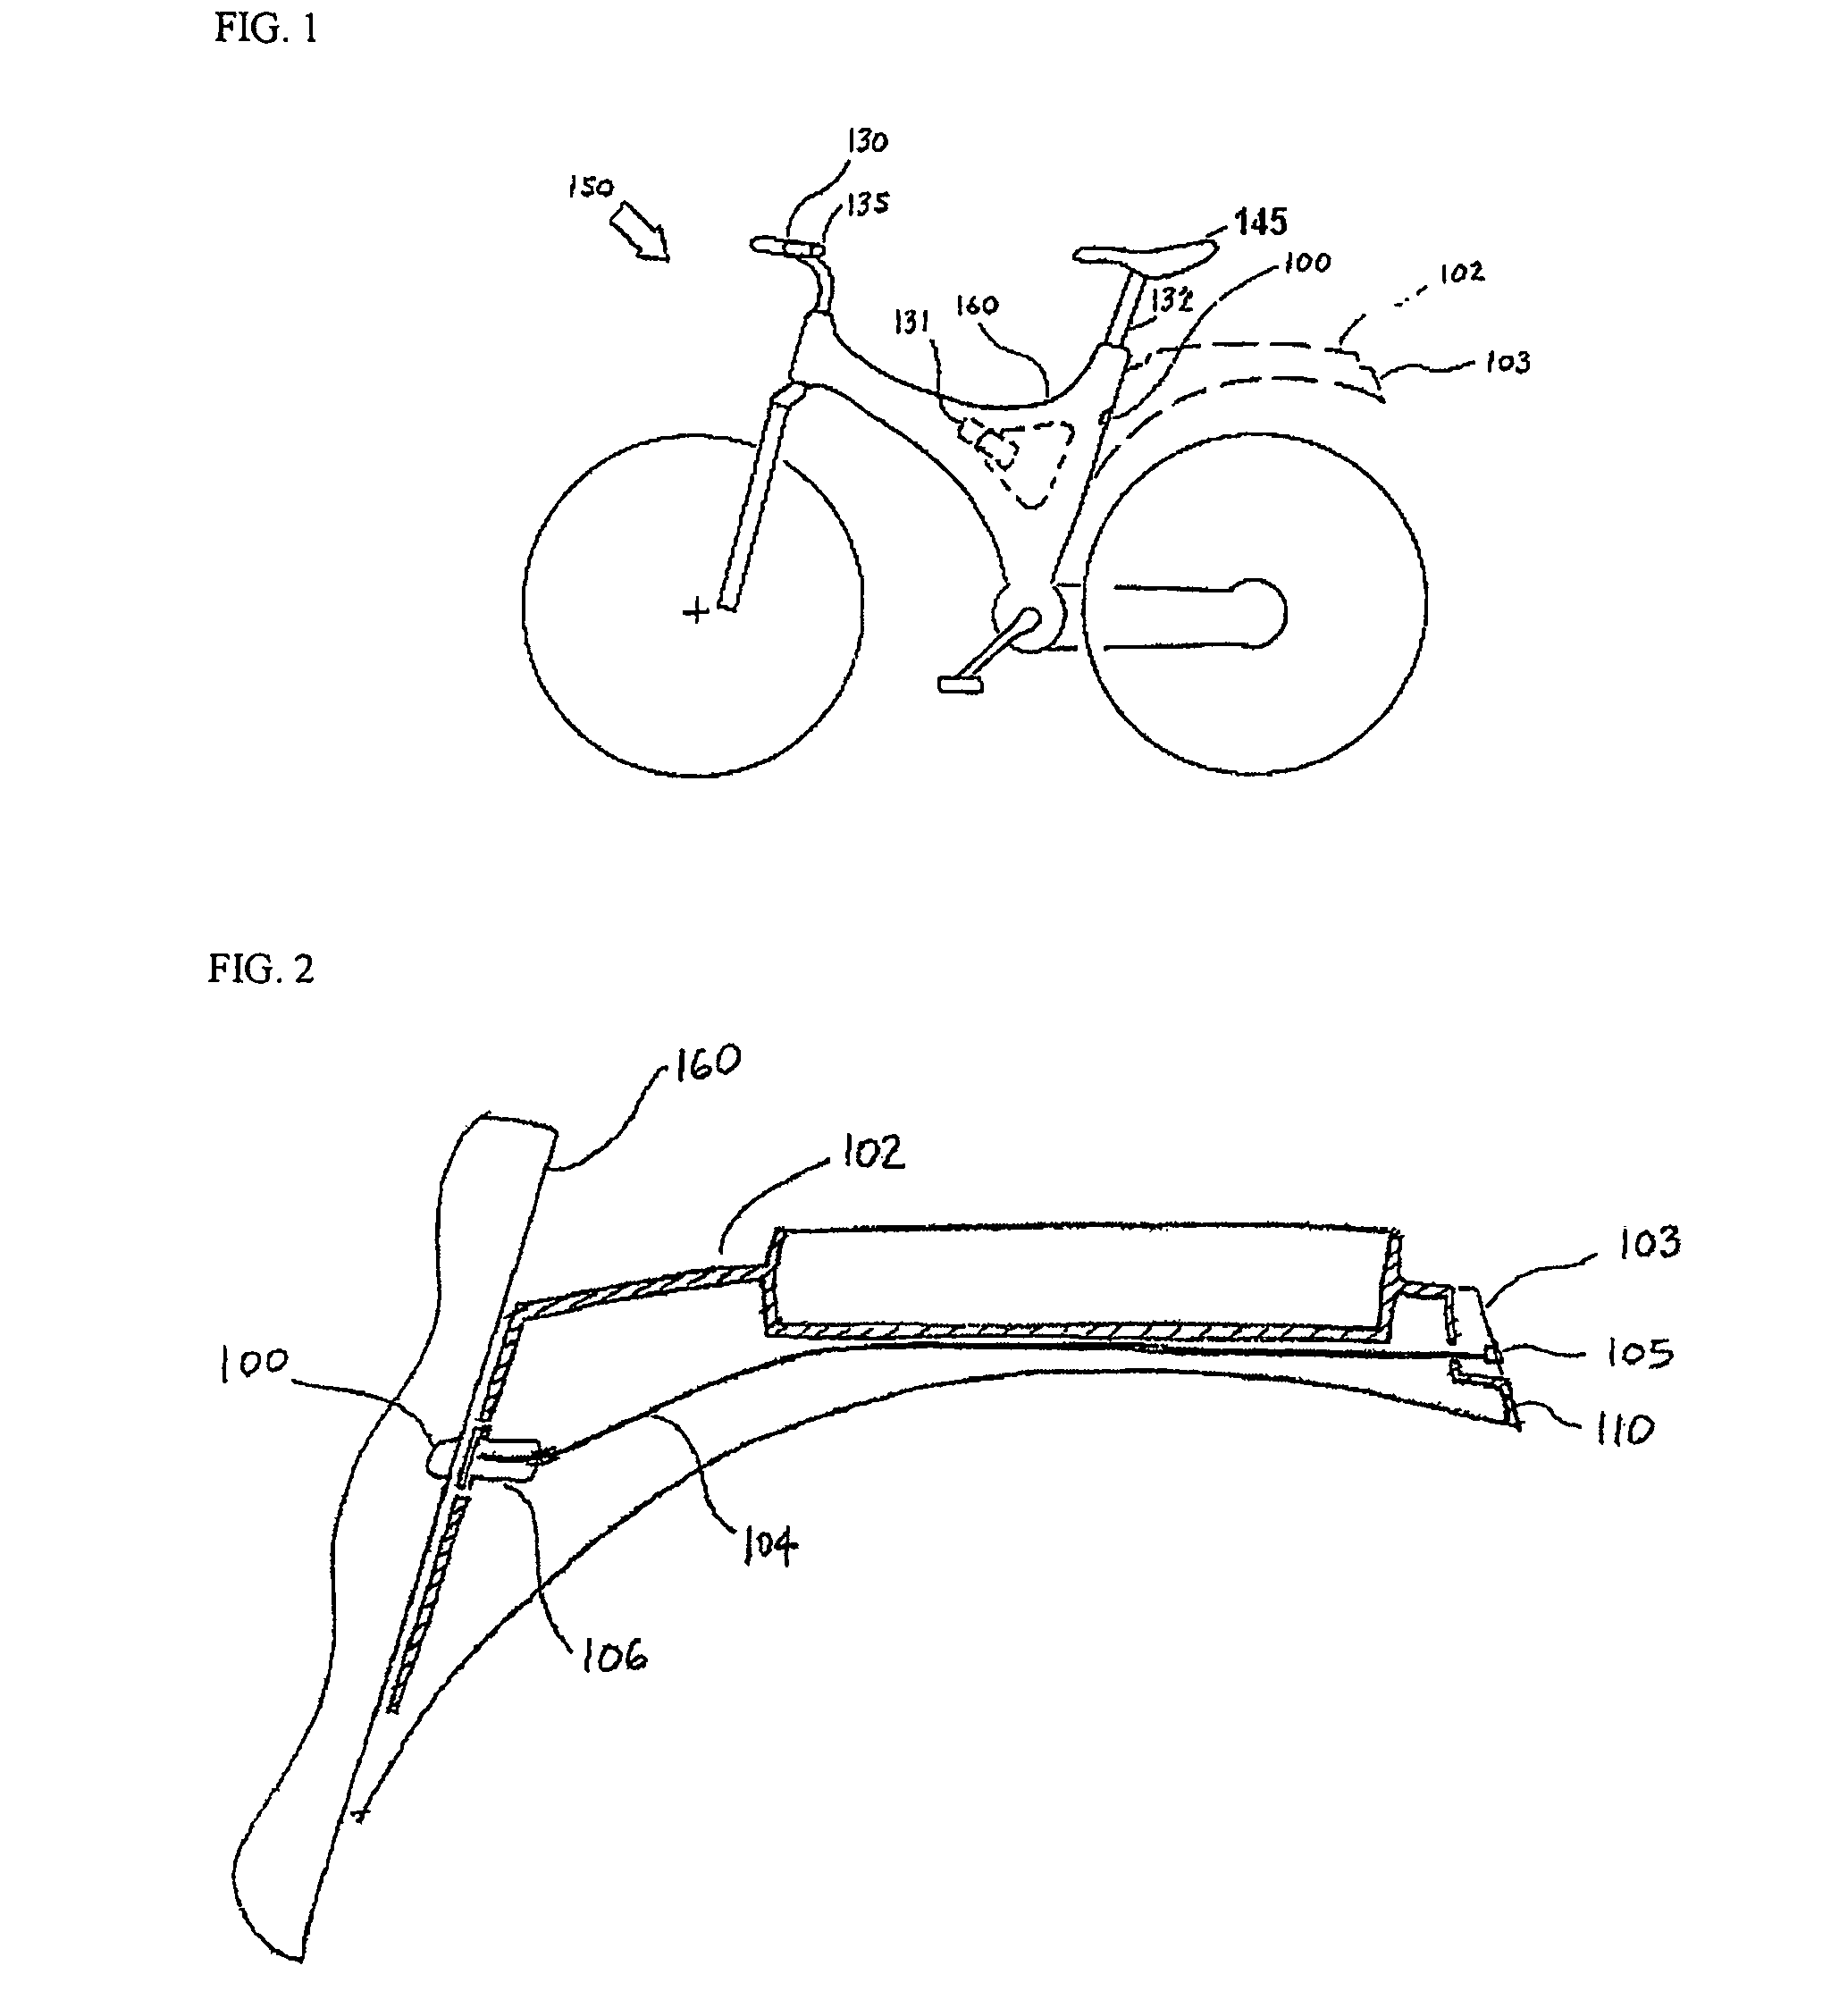 Bicycle lighting system